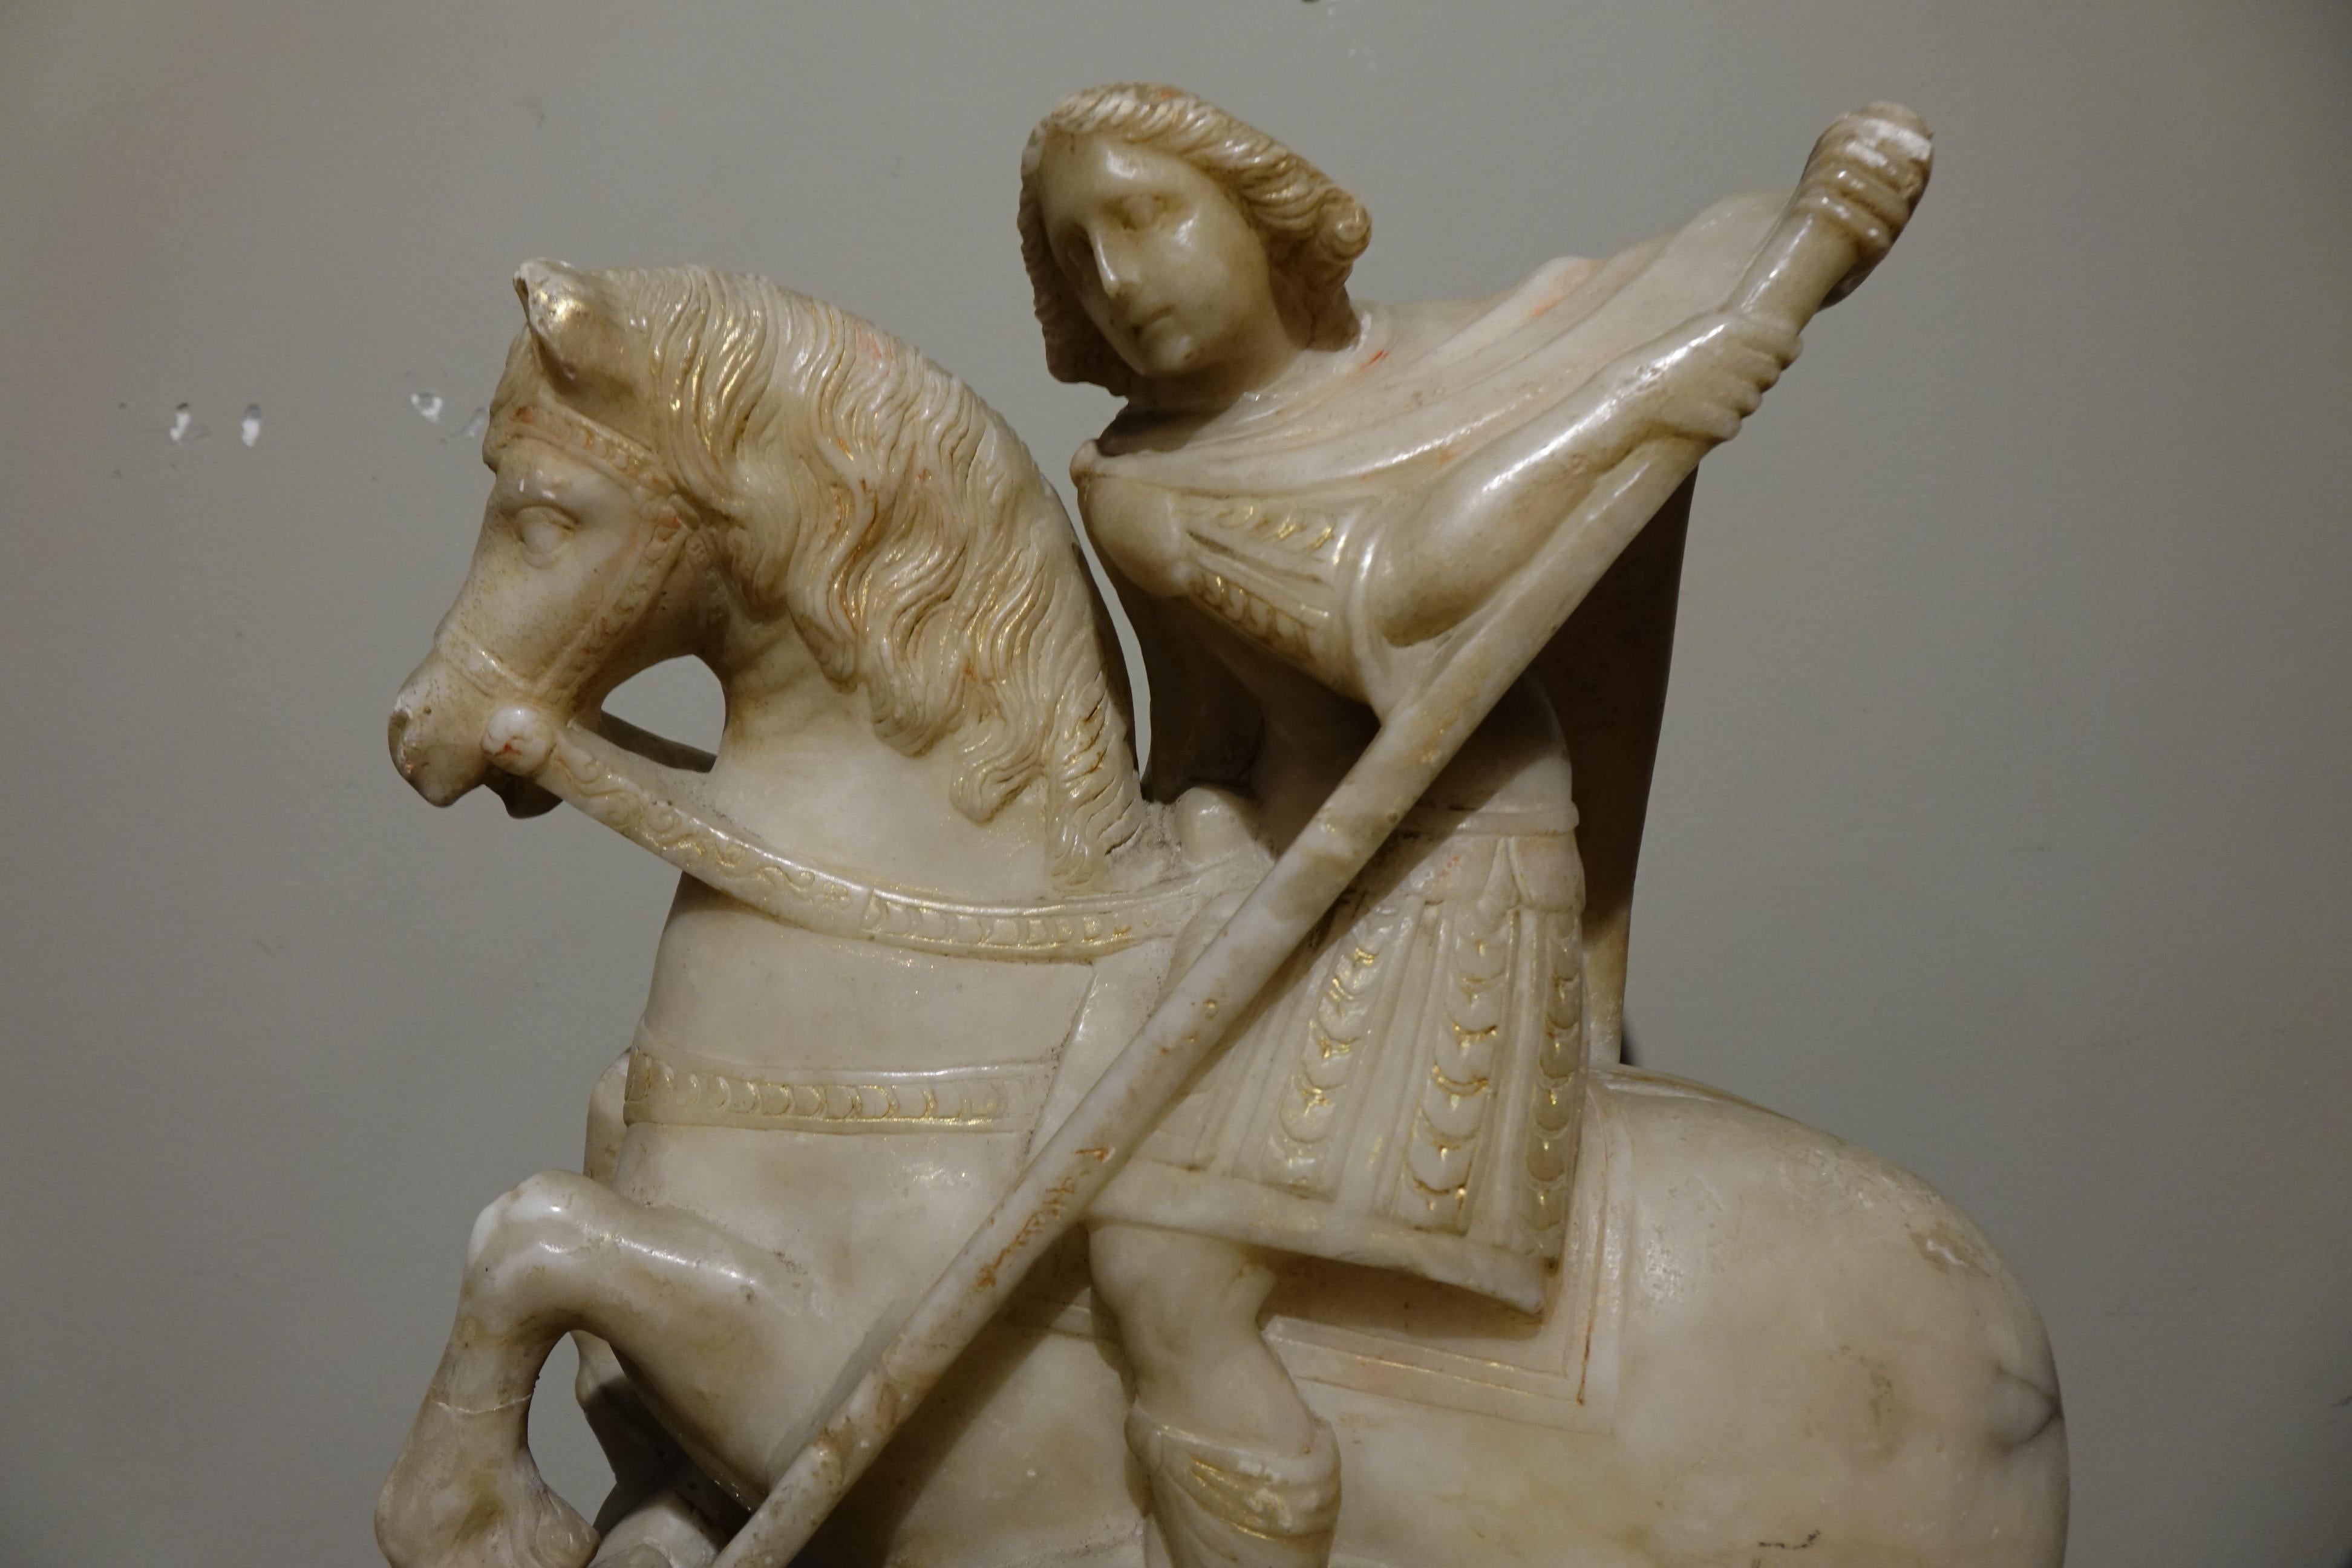 Carved alabaster group, with base, representing Saint George slaying the dragon.
Flanders, 17th c.
Missing horse's tail, chips on the base and gluing (with original parts).
Traces of polychromy and gold repairs.
Beautiful, very expressive ensemble.
